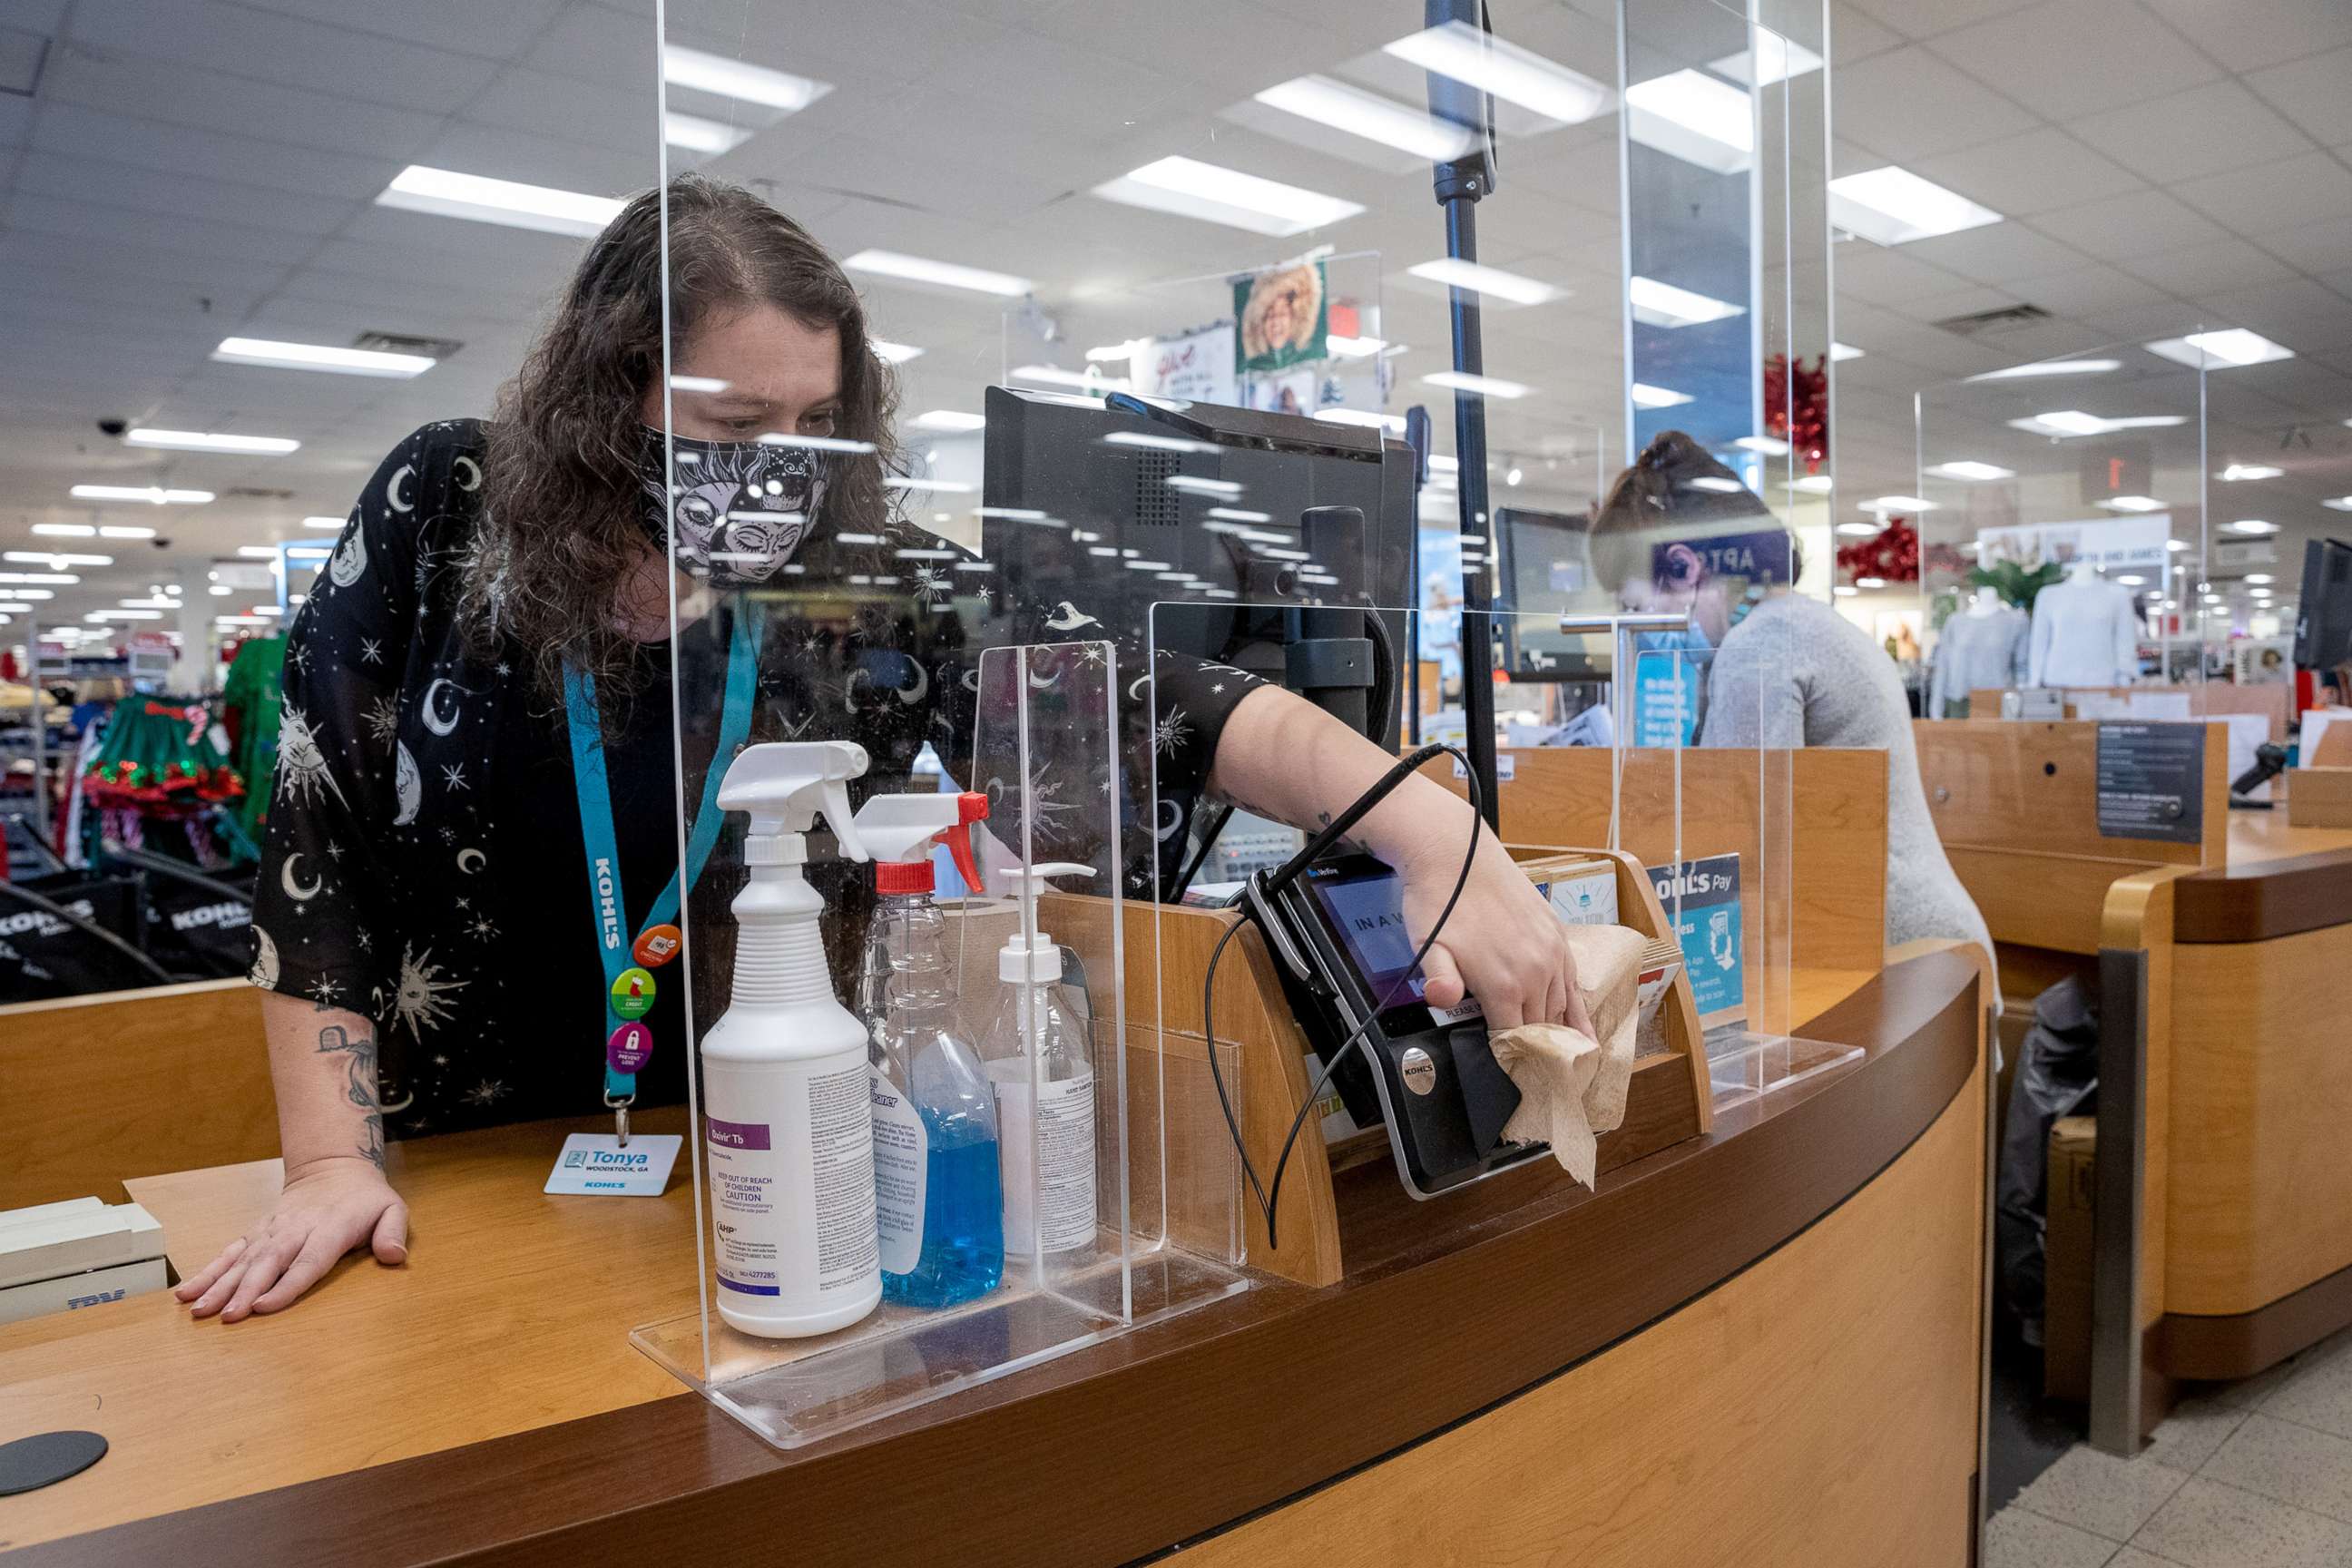 PHOTO: An employee wearing a protective mask disinfects the credit card reader at a checkout counter at a Kohl's department store in Woodstock, Ga., Nov. 23, 2020. 